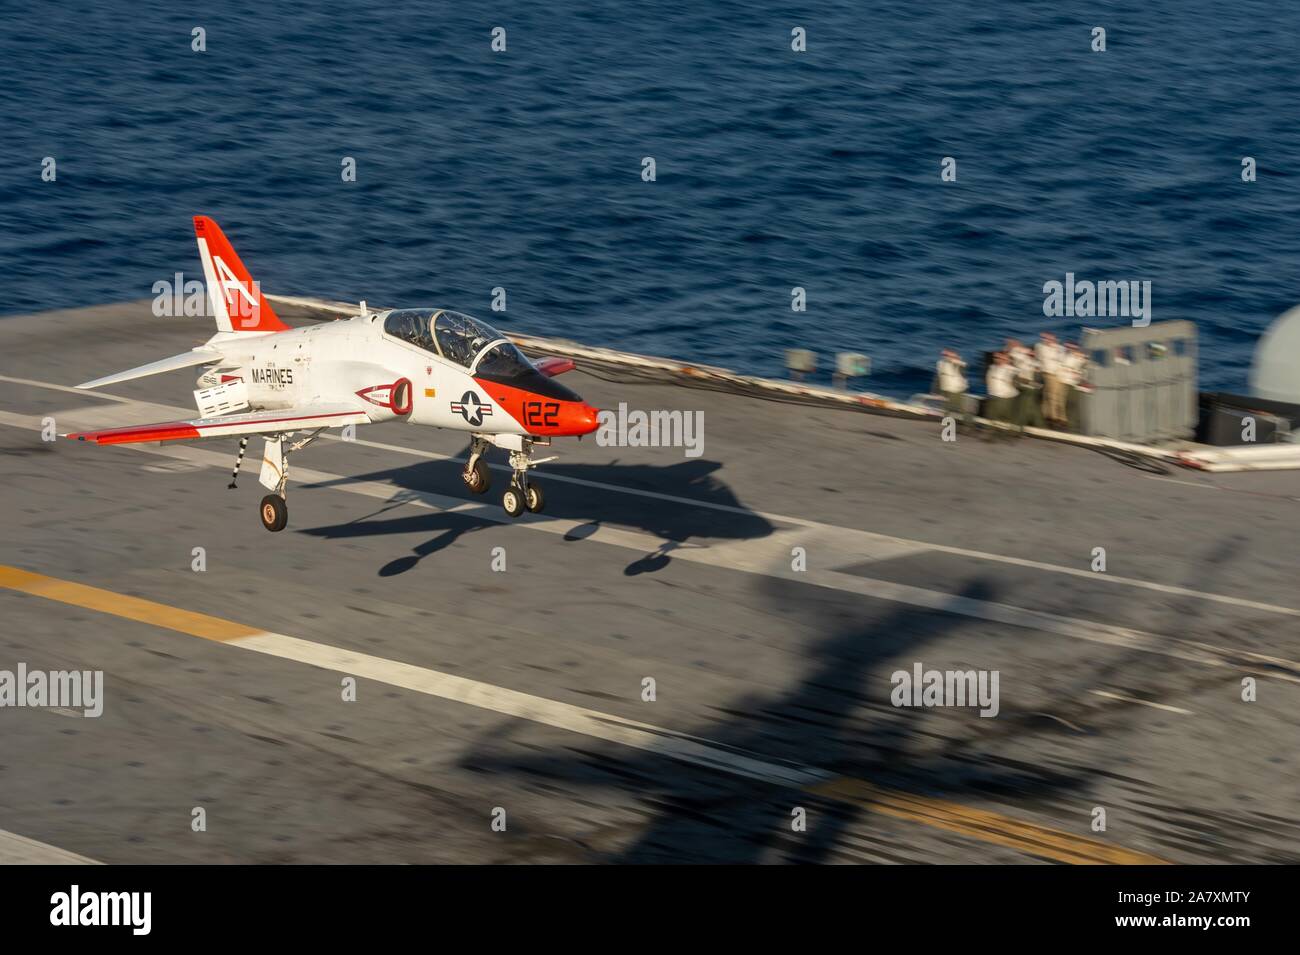 A T-45C Goshawk training aircraft, assigned to Training Air Wing (TW) 1, prepares to land on the flight deck of the aircraft carrier USS John C. Stennis (CVN 74) in the Atlantic Ocean, Nov. 2, 2019. The John C. Stennis is underway conducting routine operations in support of Commander, Naval Air Force Atlantic. (U.S. Navy photo by Mass Communication Specialist Seaman Thomas R. Pittman) Stock Photo